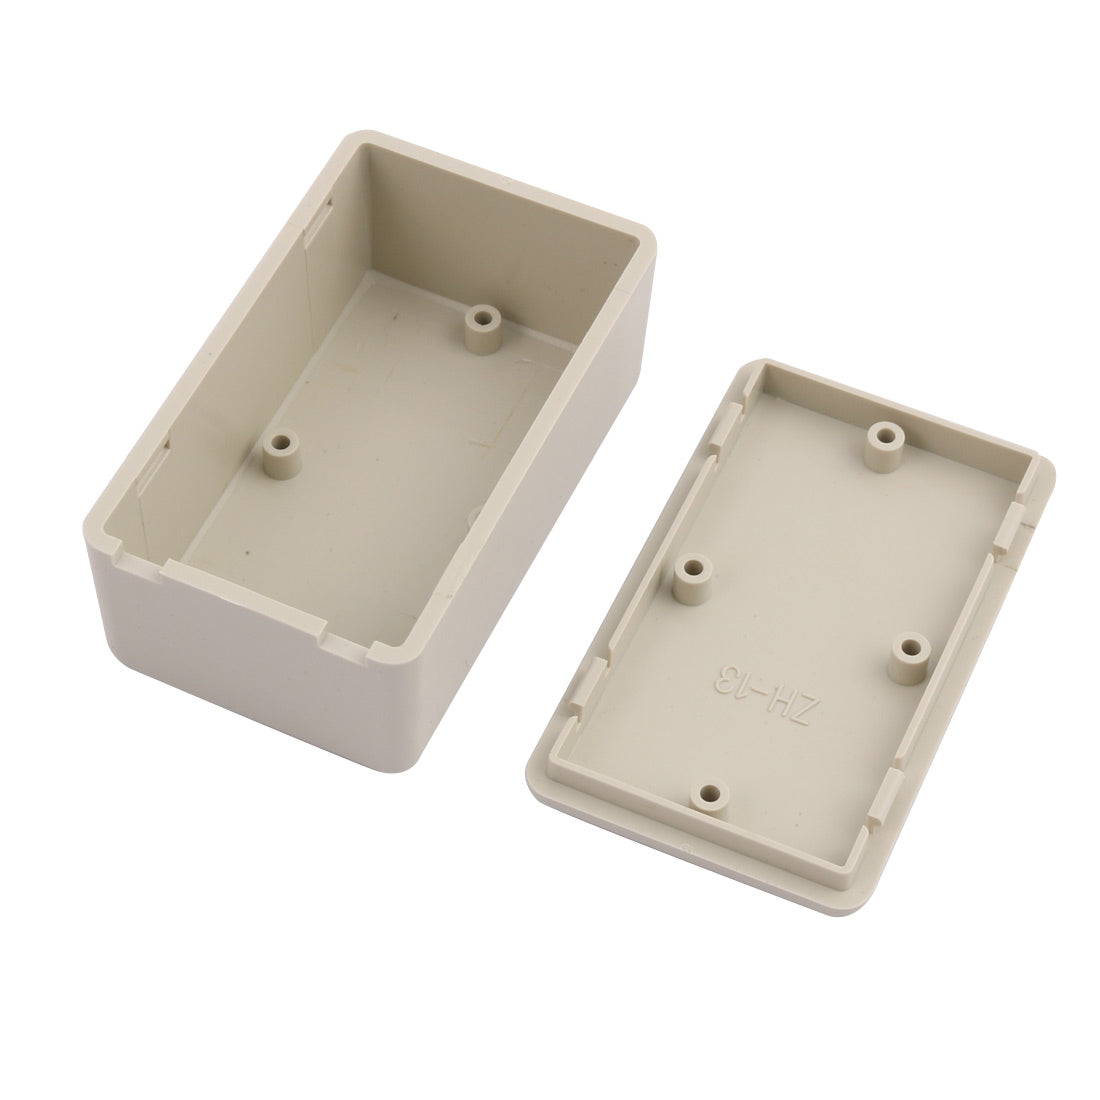 uxcell Uxcell 4pcs Dustproof IP65 Plastic Electric Project Case Junction Box 60mm x 36mm x 25mm Gray